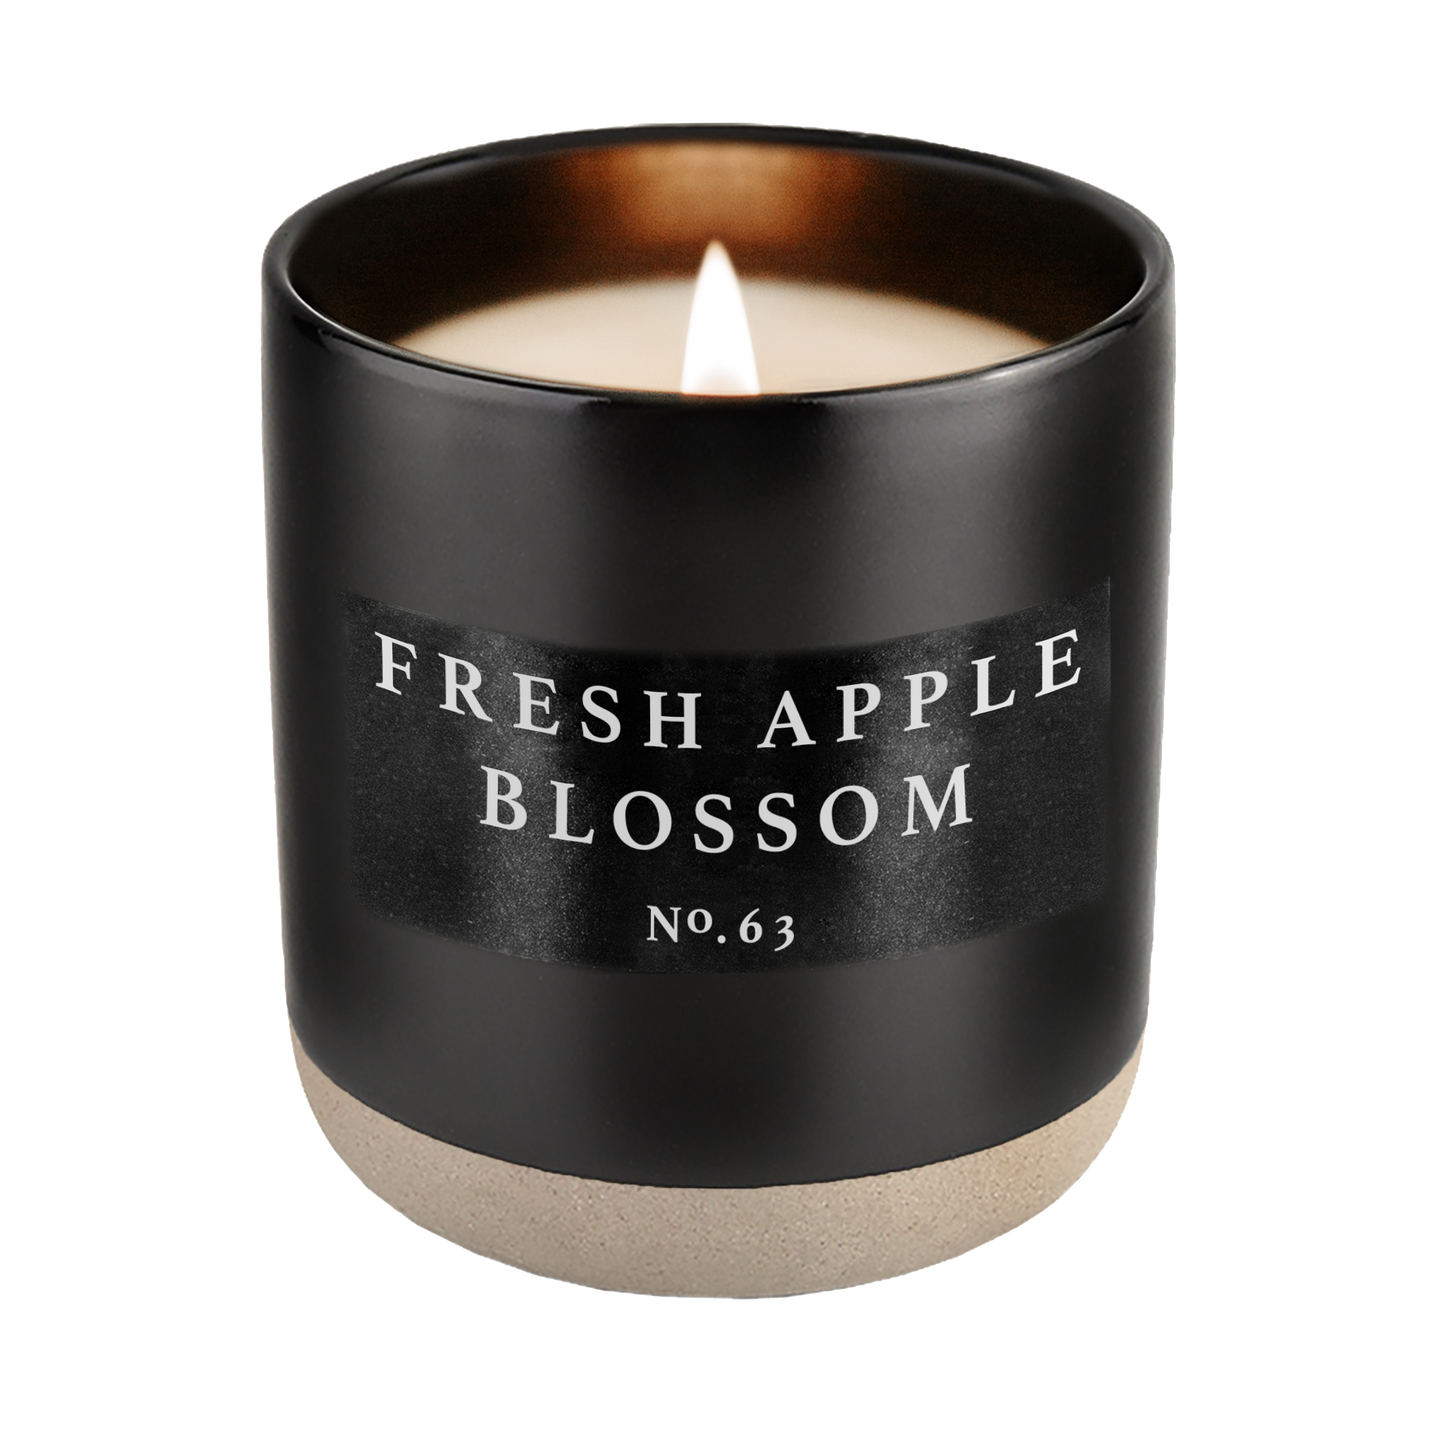 *NEW* Fresh Apple Blossom 12 oz Soy Candle